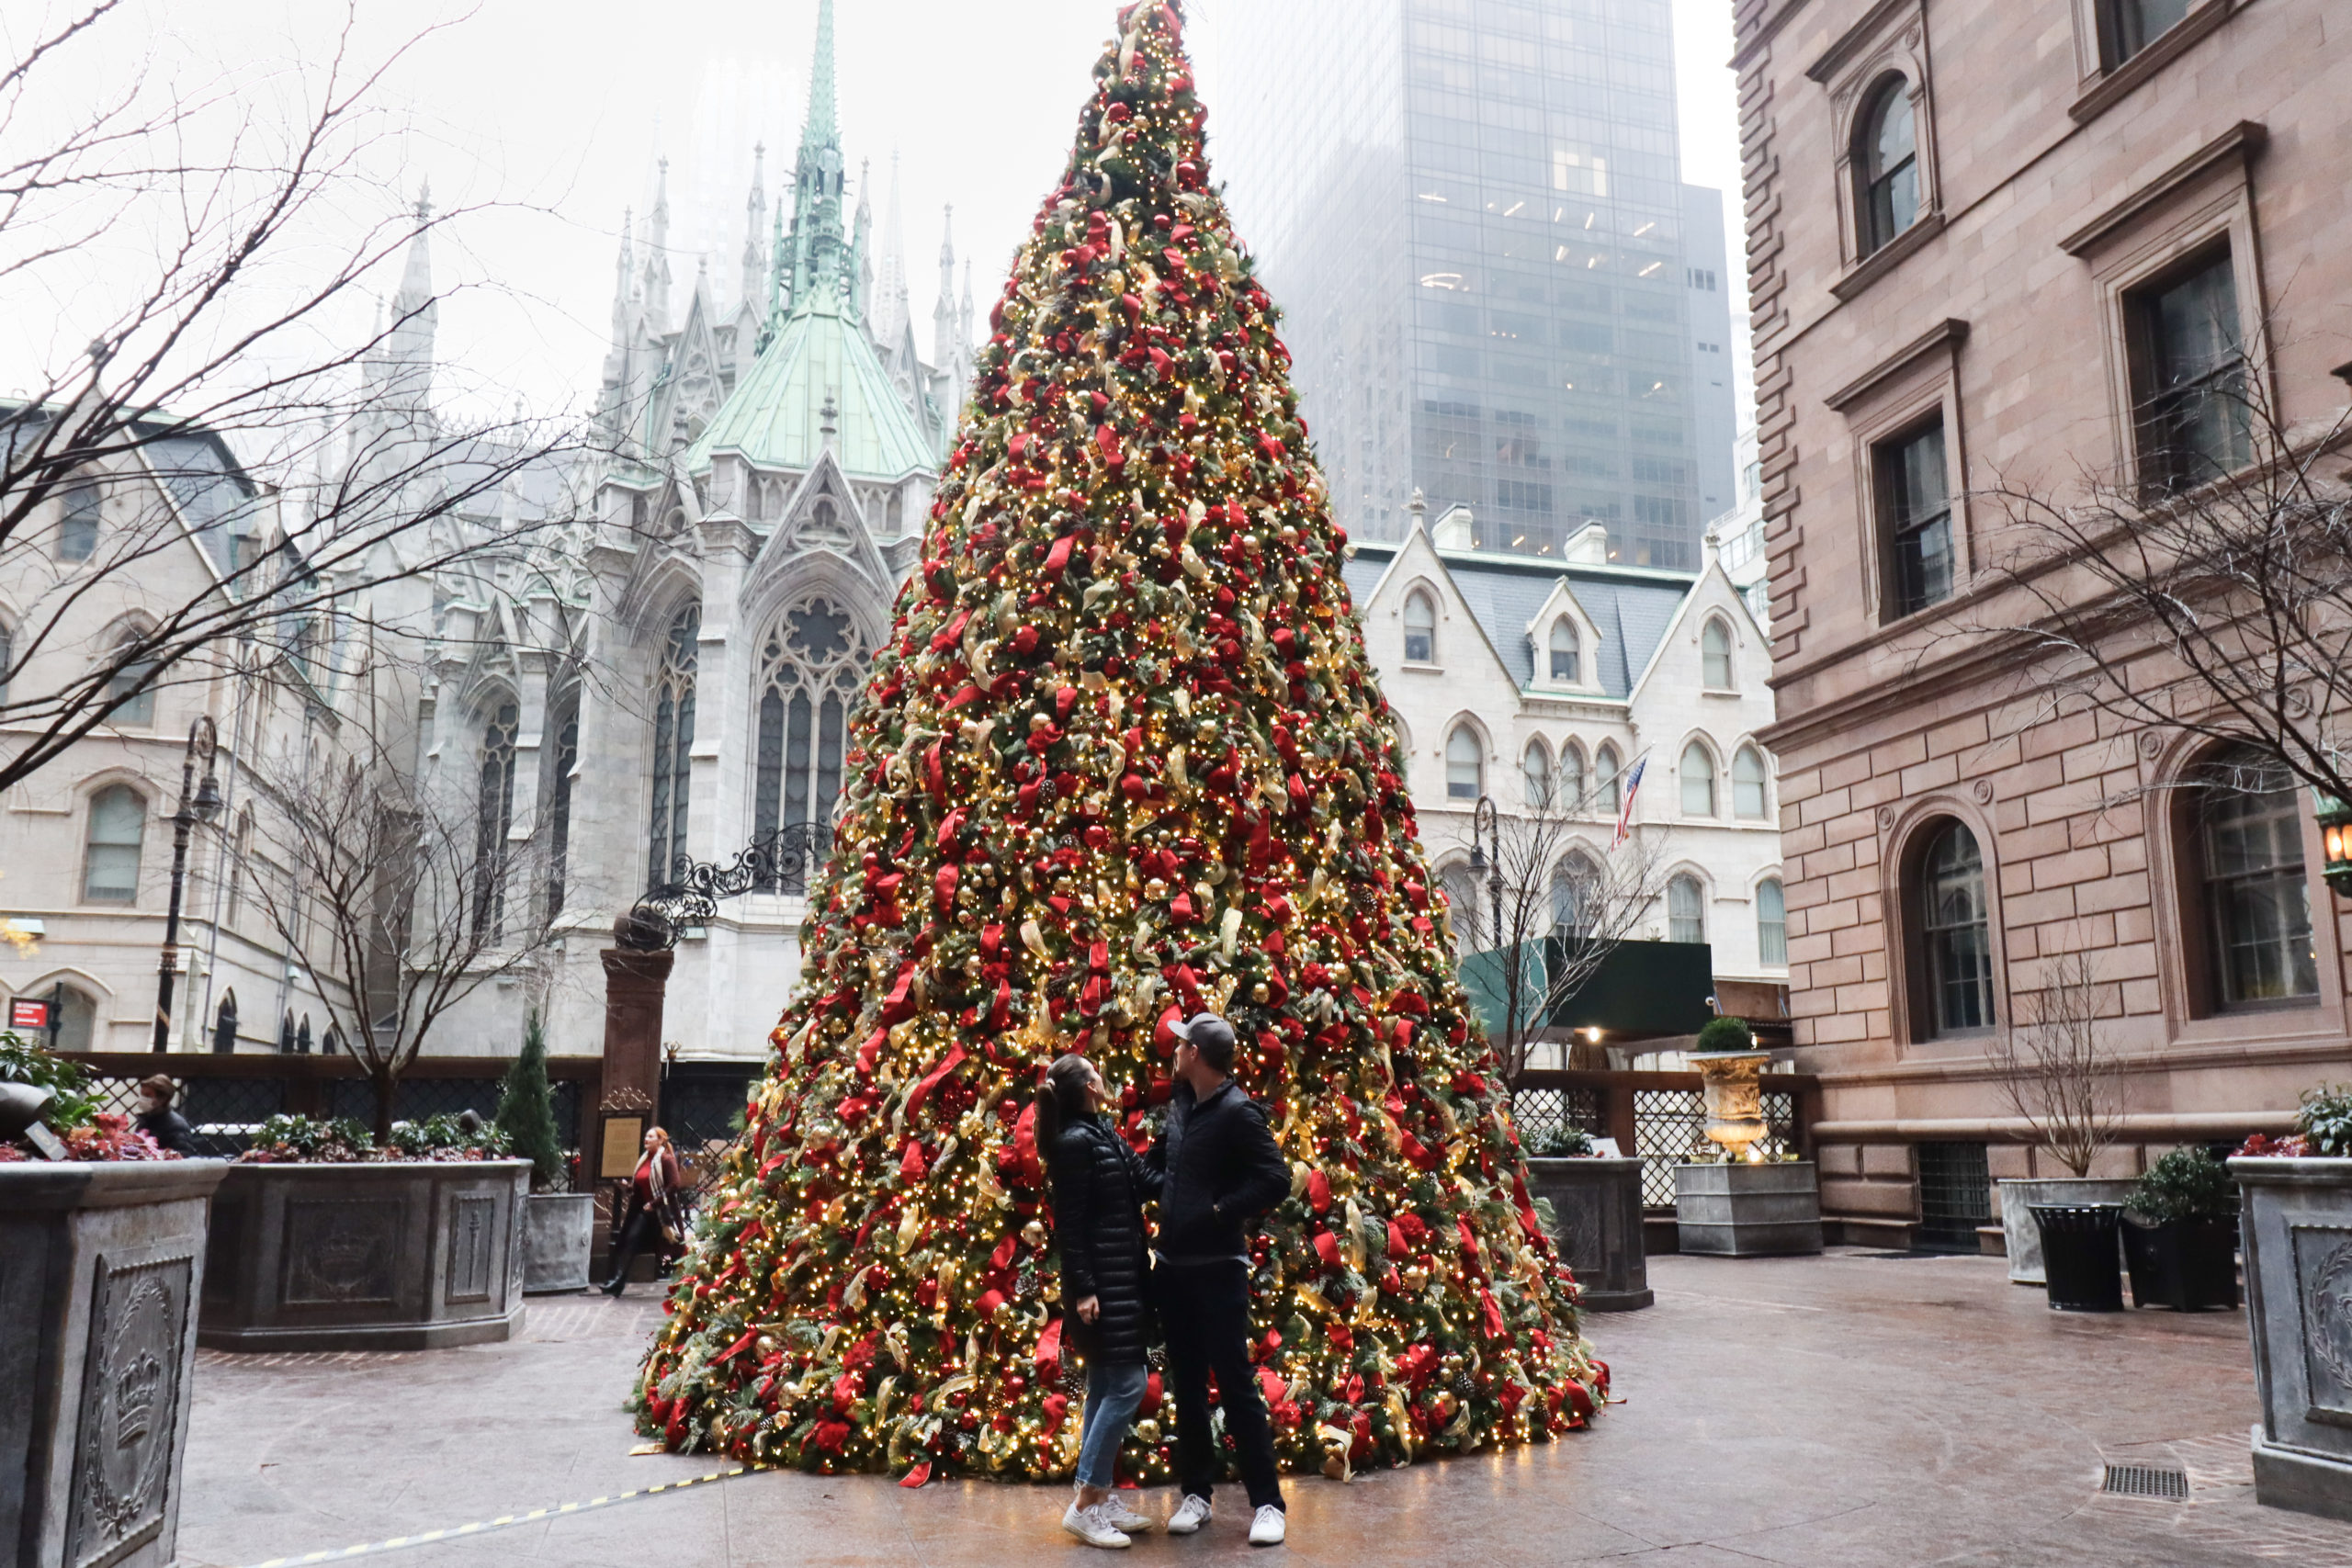 A couple standing in front of the Lotte Palace's Christmas tree.